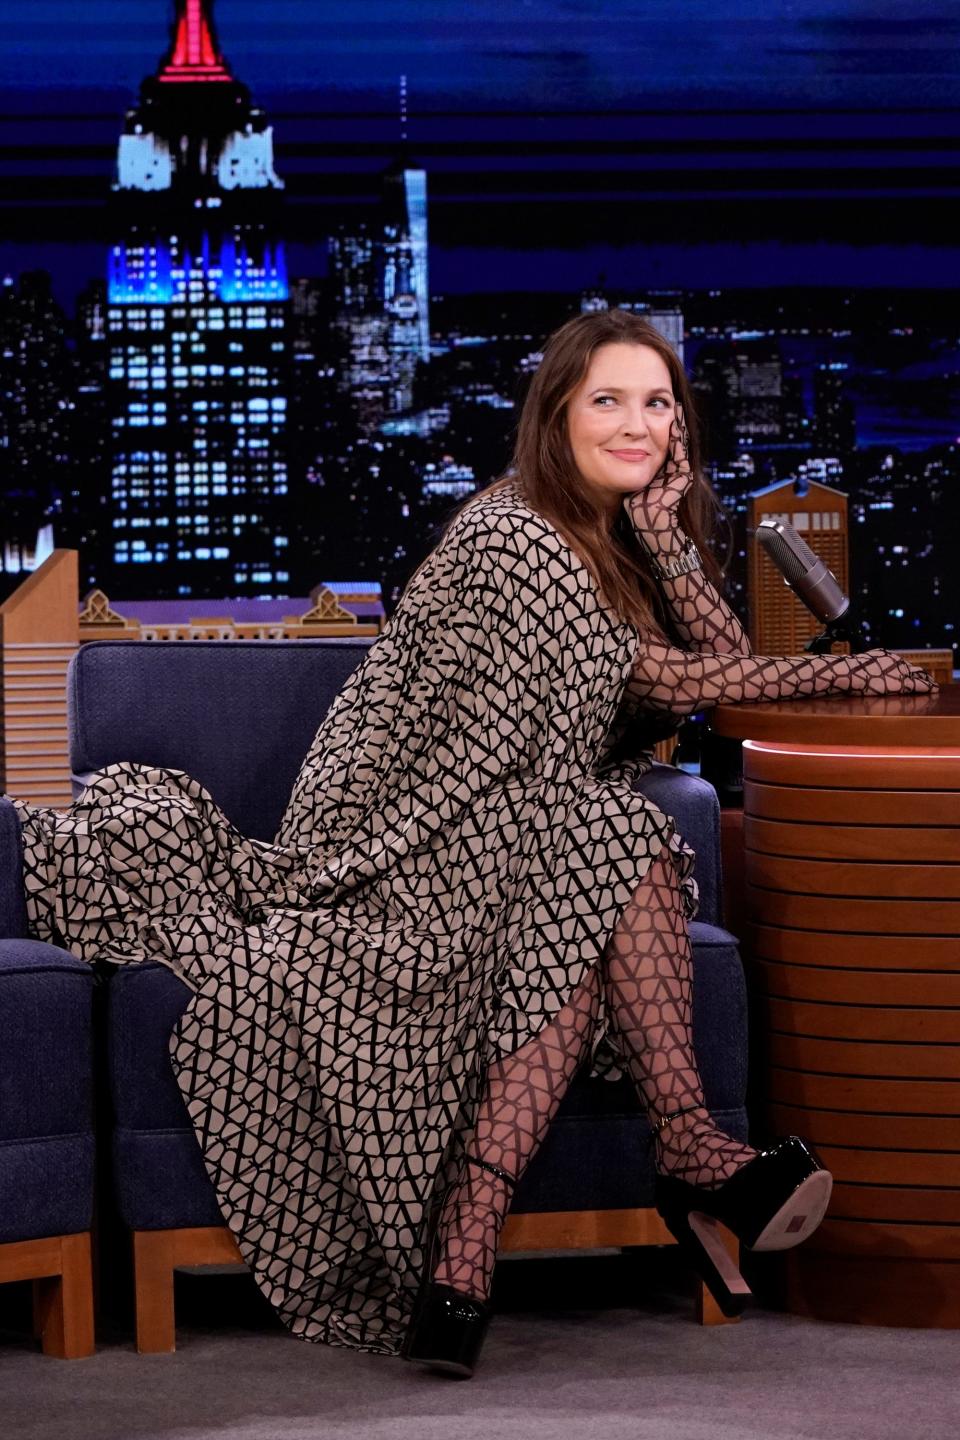 Drew Barrymore during an interview on The Tonight Show with Jimmy Fallon on April 27, 2023.